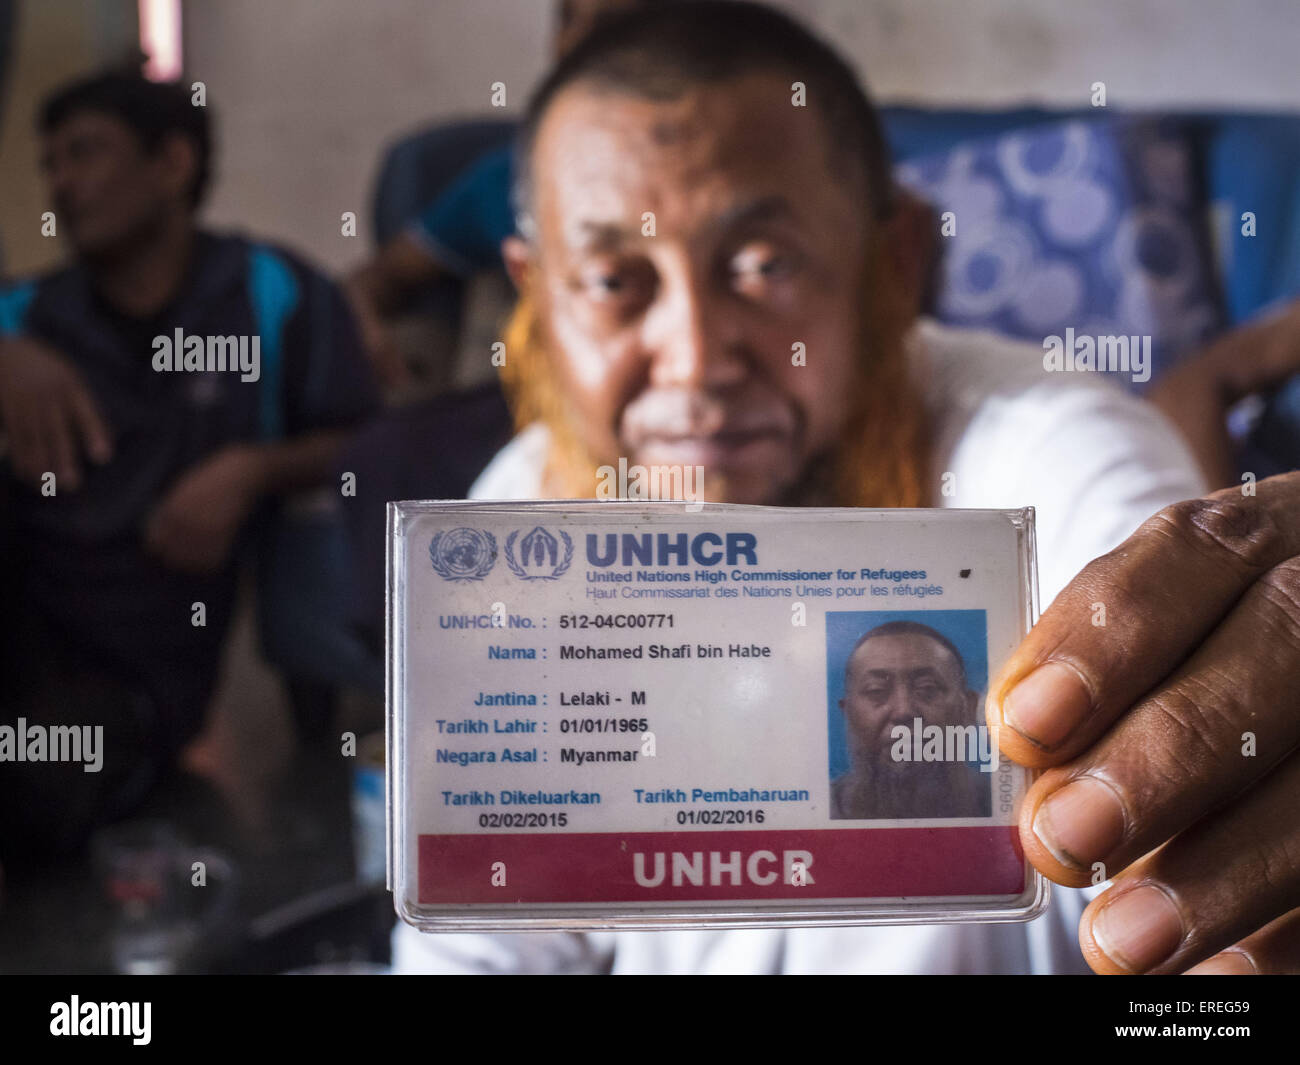 June 1, 2015 - Kulai, Johore, Malaysia - MOHAMED SHAFI bin HABE, a prominent member of the Rohingya community in Kulai, Malaysia, holds up his UNHCR card. The UN says the Rohingya, a Muslim minority in western Myanmar, are the most persecuted ethnic minority in the world. The government of Myanmar insists the Rohingya are illegal immigrants from Bangladesh and has refused to grant them citizenship. Most of the Rohingya in Myanmar have been confined to Internal Displaced Persons camp in Rakhine state, bordering Bangladesh. Thousands of Rohingya have fled Myanmar and settled in Malaysia. © ZUMA  Stock Photo